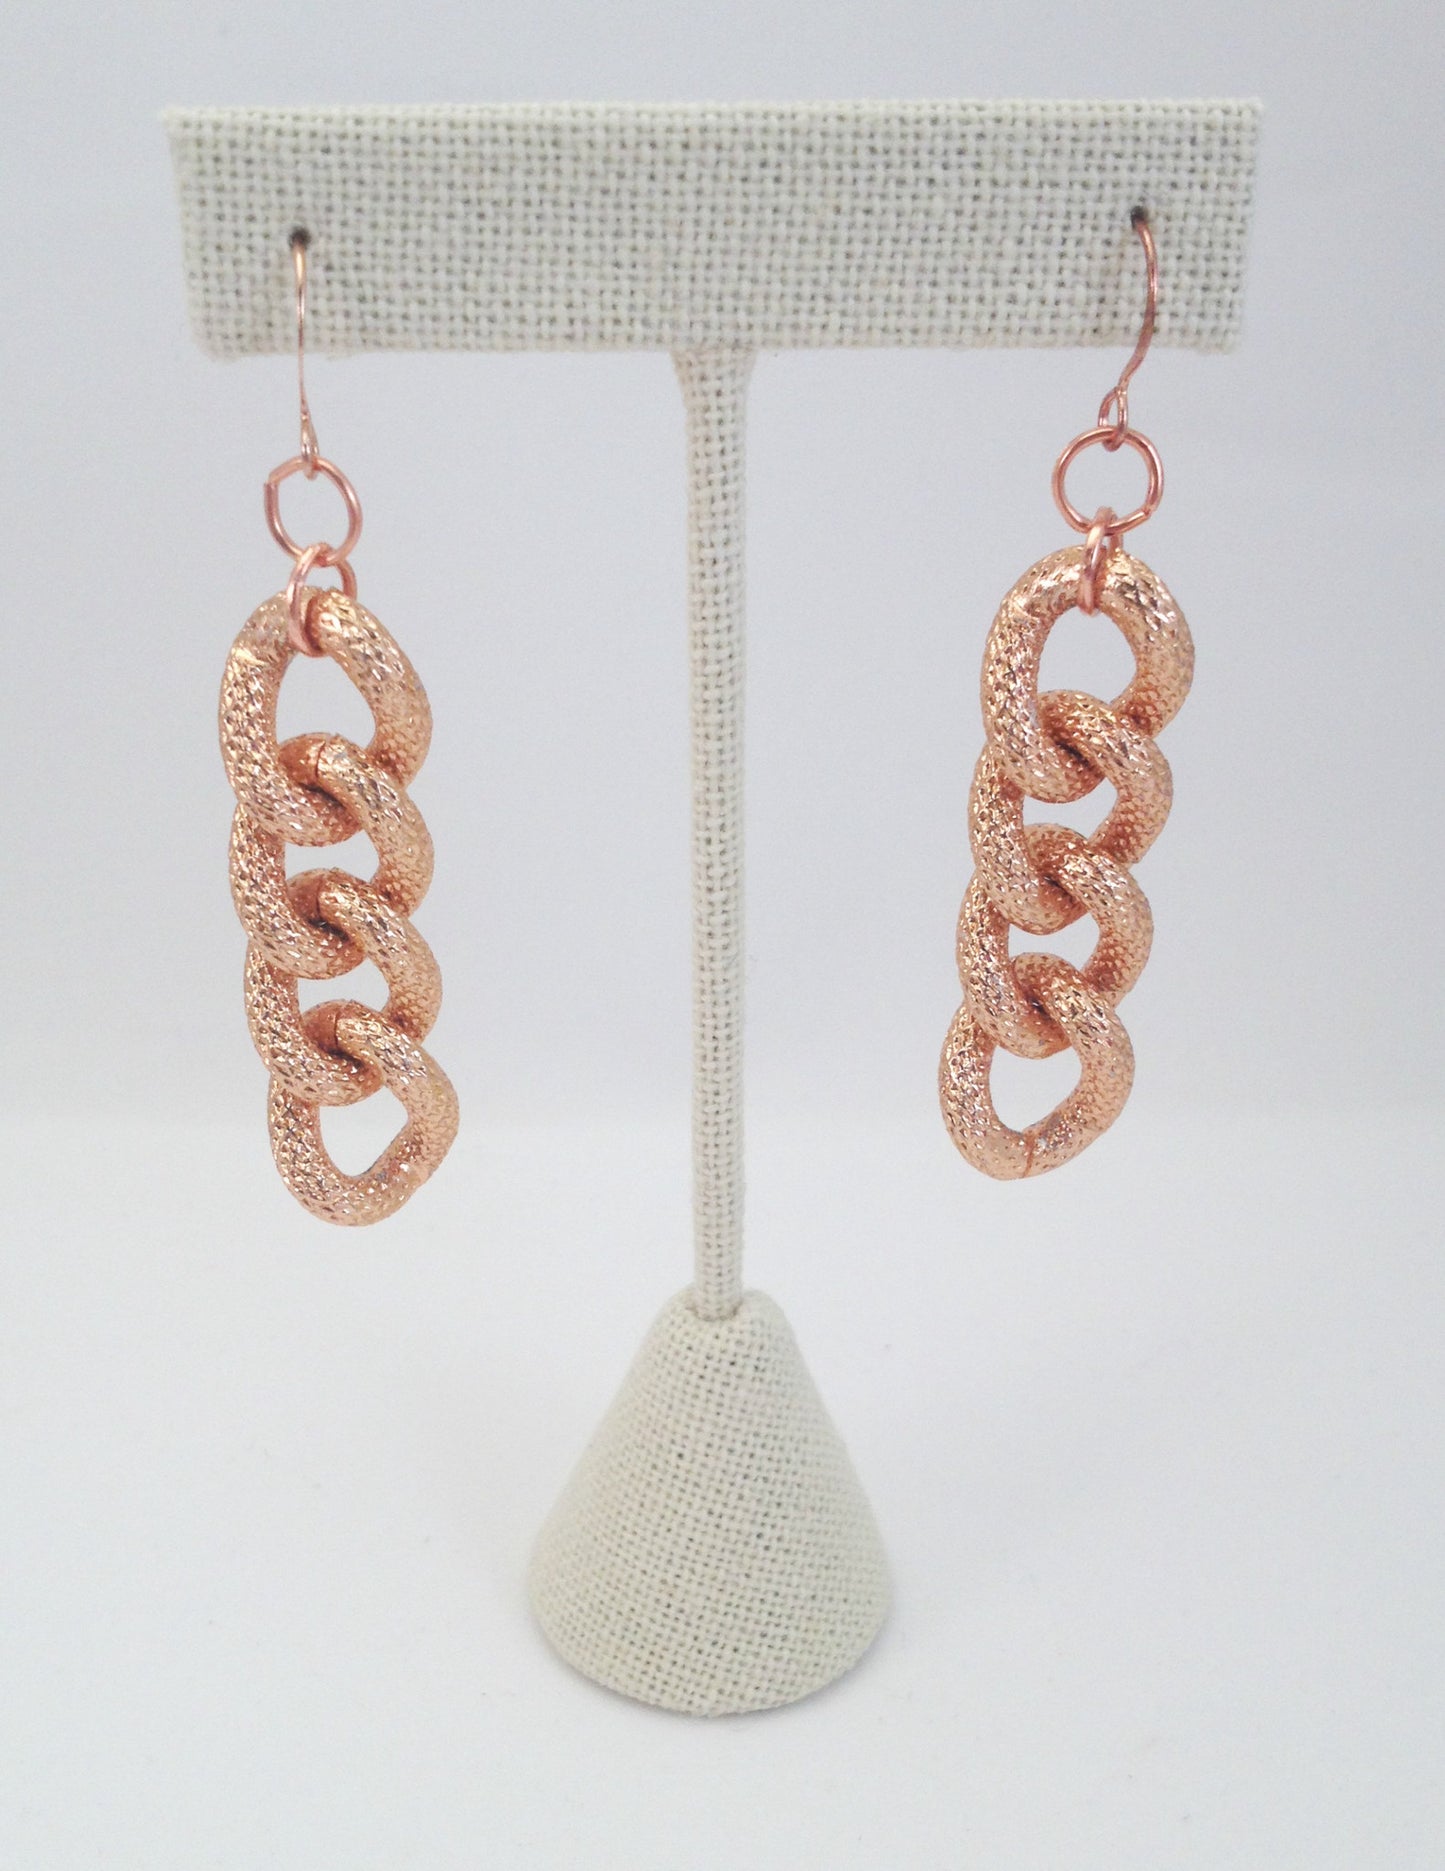 4 chain link earrings, textured